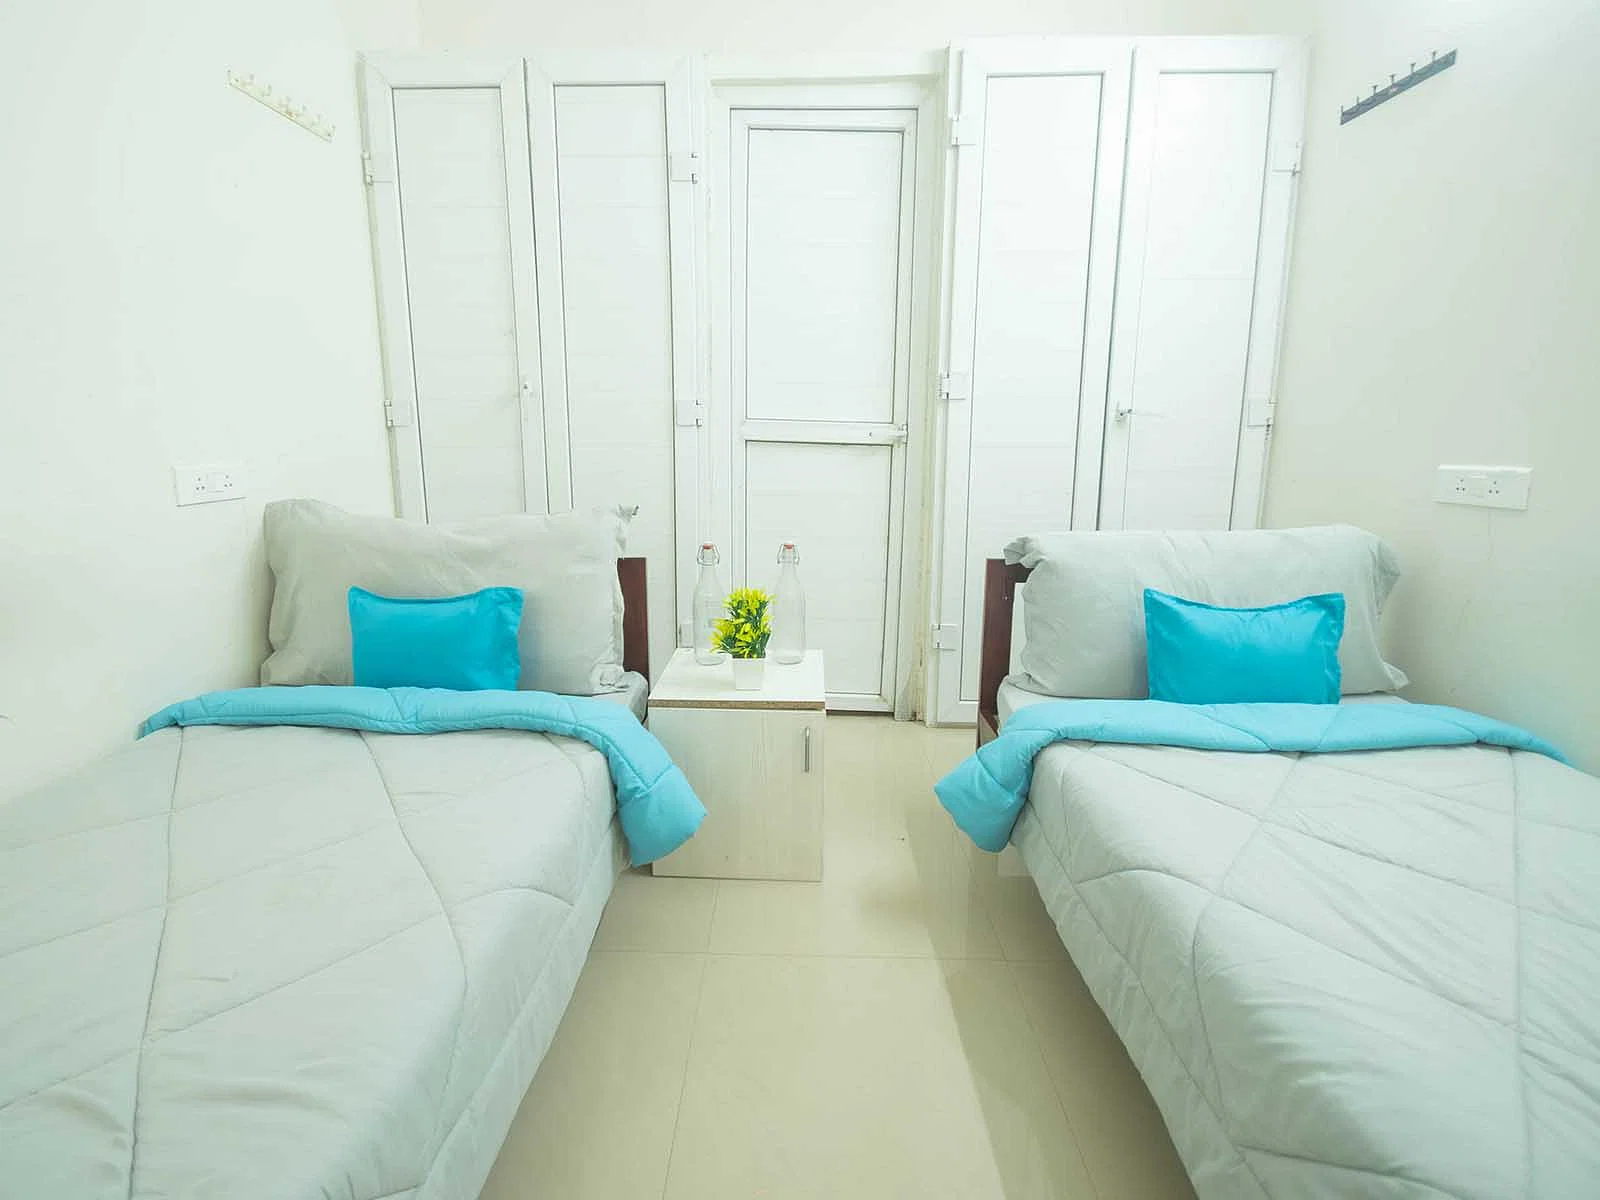 budget-friendly PGs and hostels for men with single rooms with daily hopusekeeping-Zolo Playa B